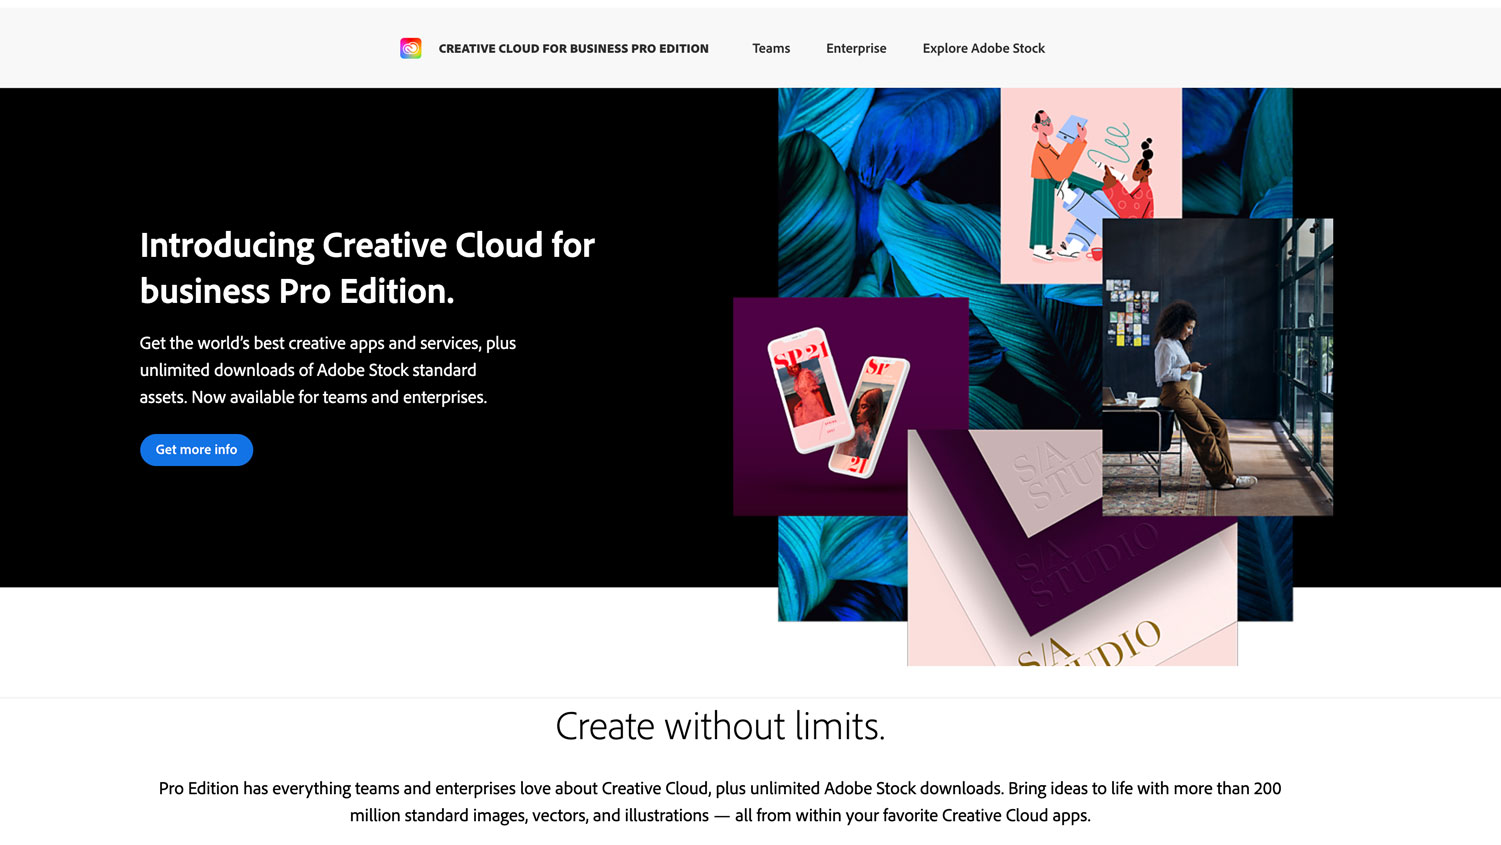 Adobe launches Creative Cloud Pro Edition, with 200 MILLION